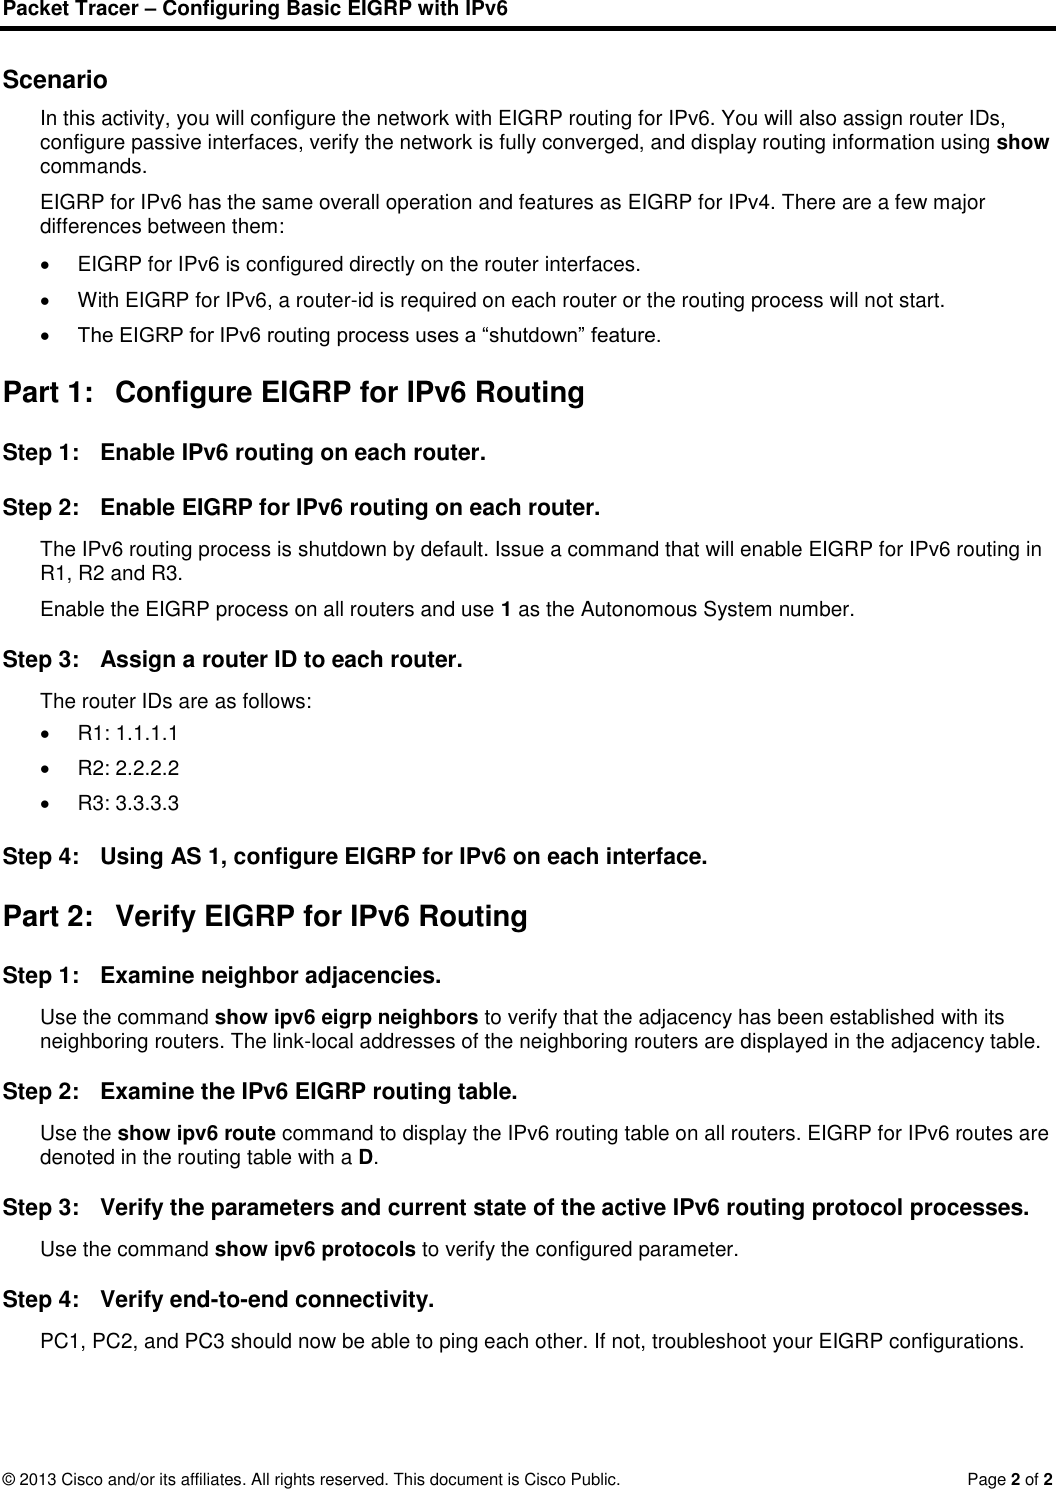 Page 2 of 2 - 6.4.3.4 Packet Tracer - Configuring Basic EIGRP With IPv6 Routing Instructions